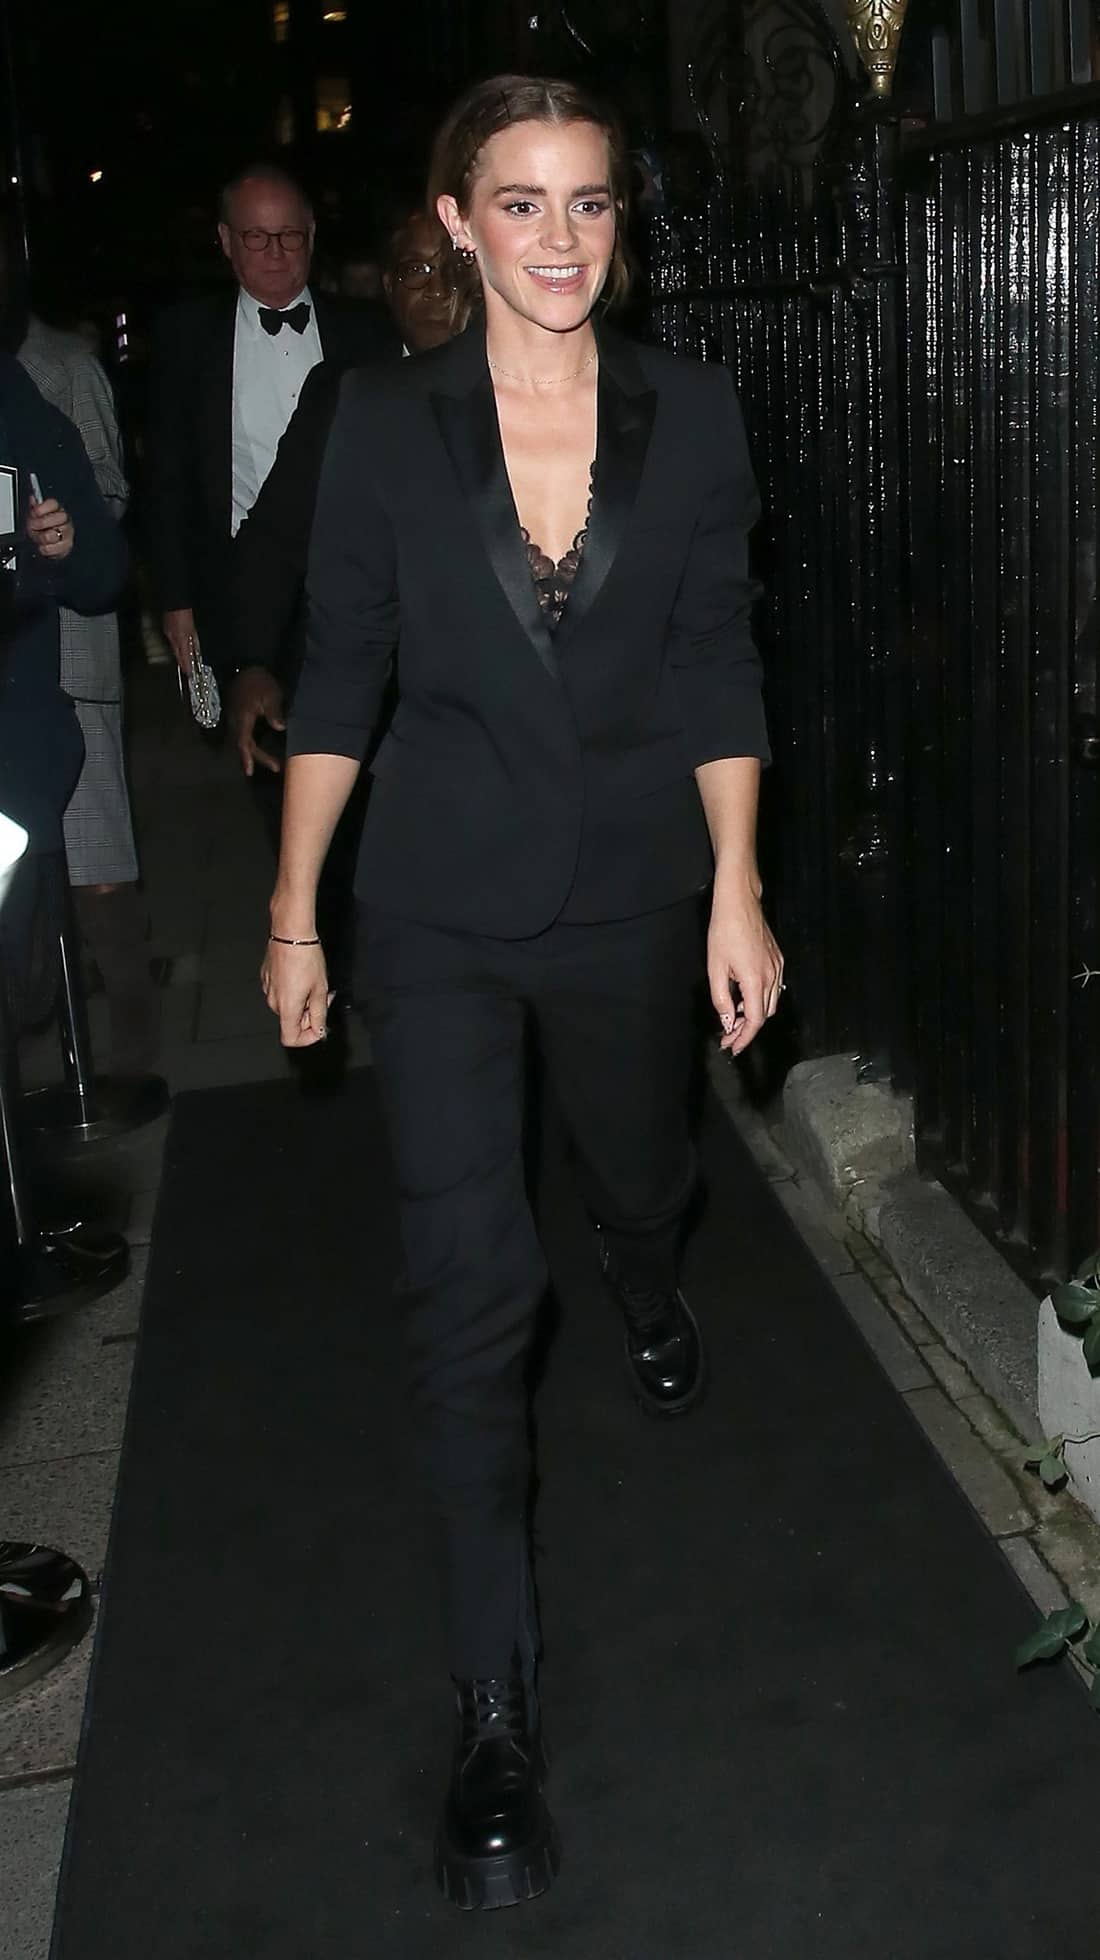 Emma Watson in a Pantsuit at the British Vogue x Tiffany Party at Annabel's